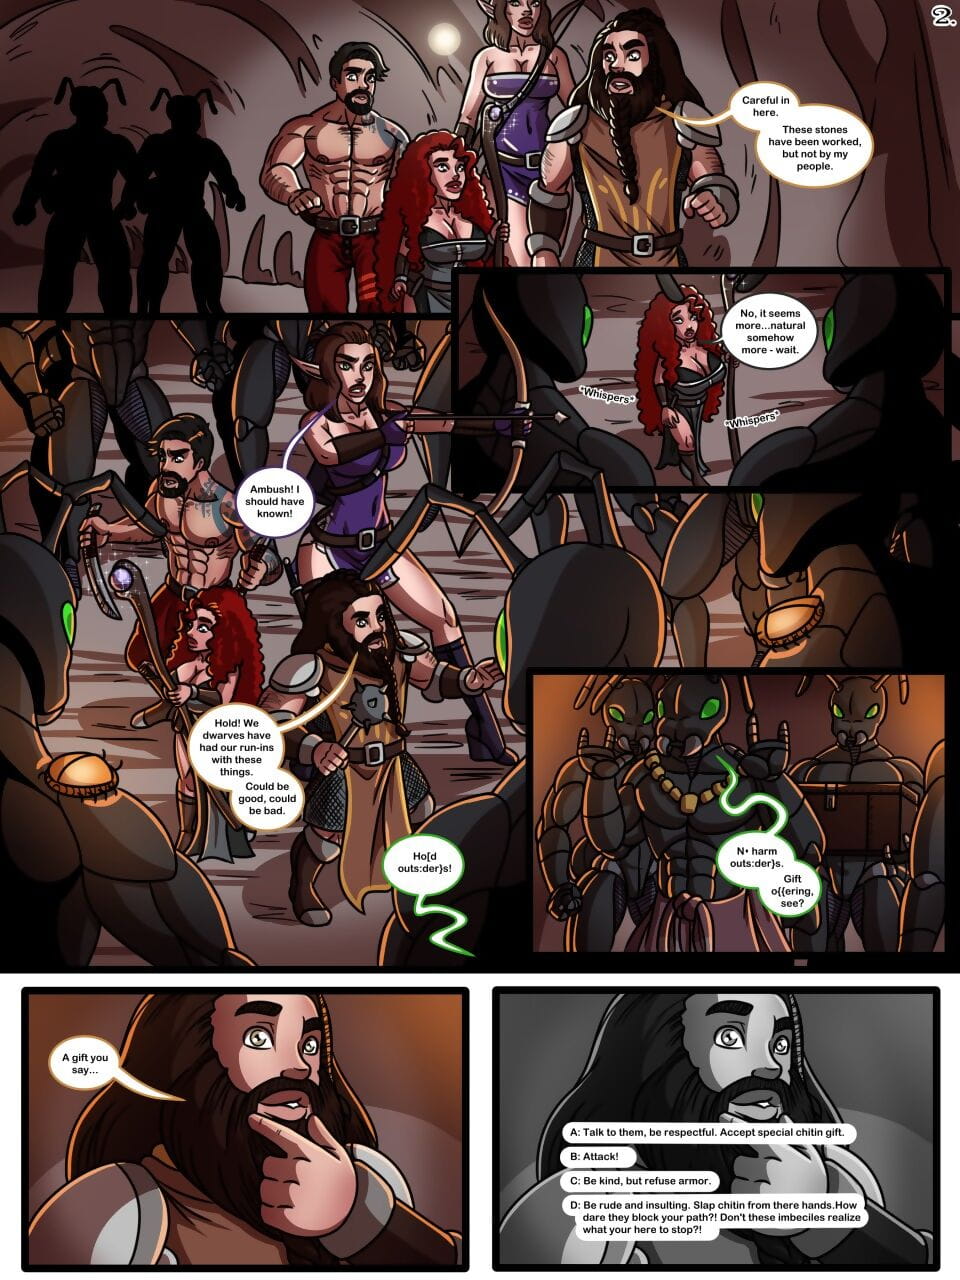 JZerosk- To Kill a Warlord page 1